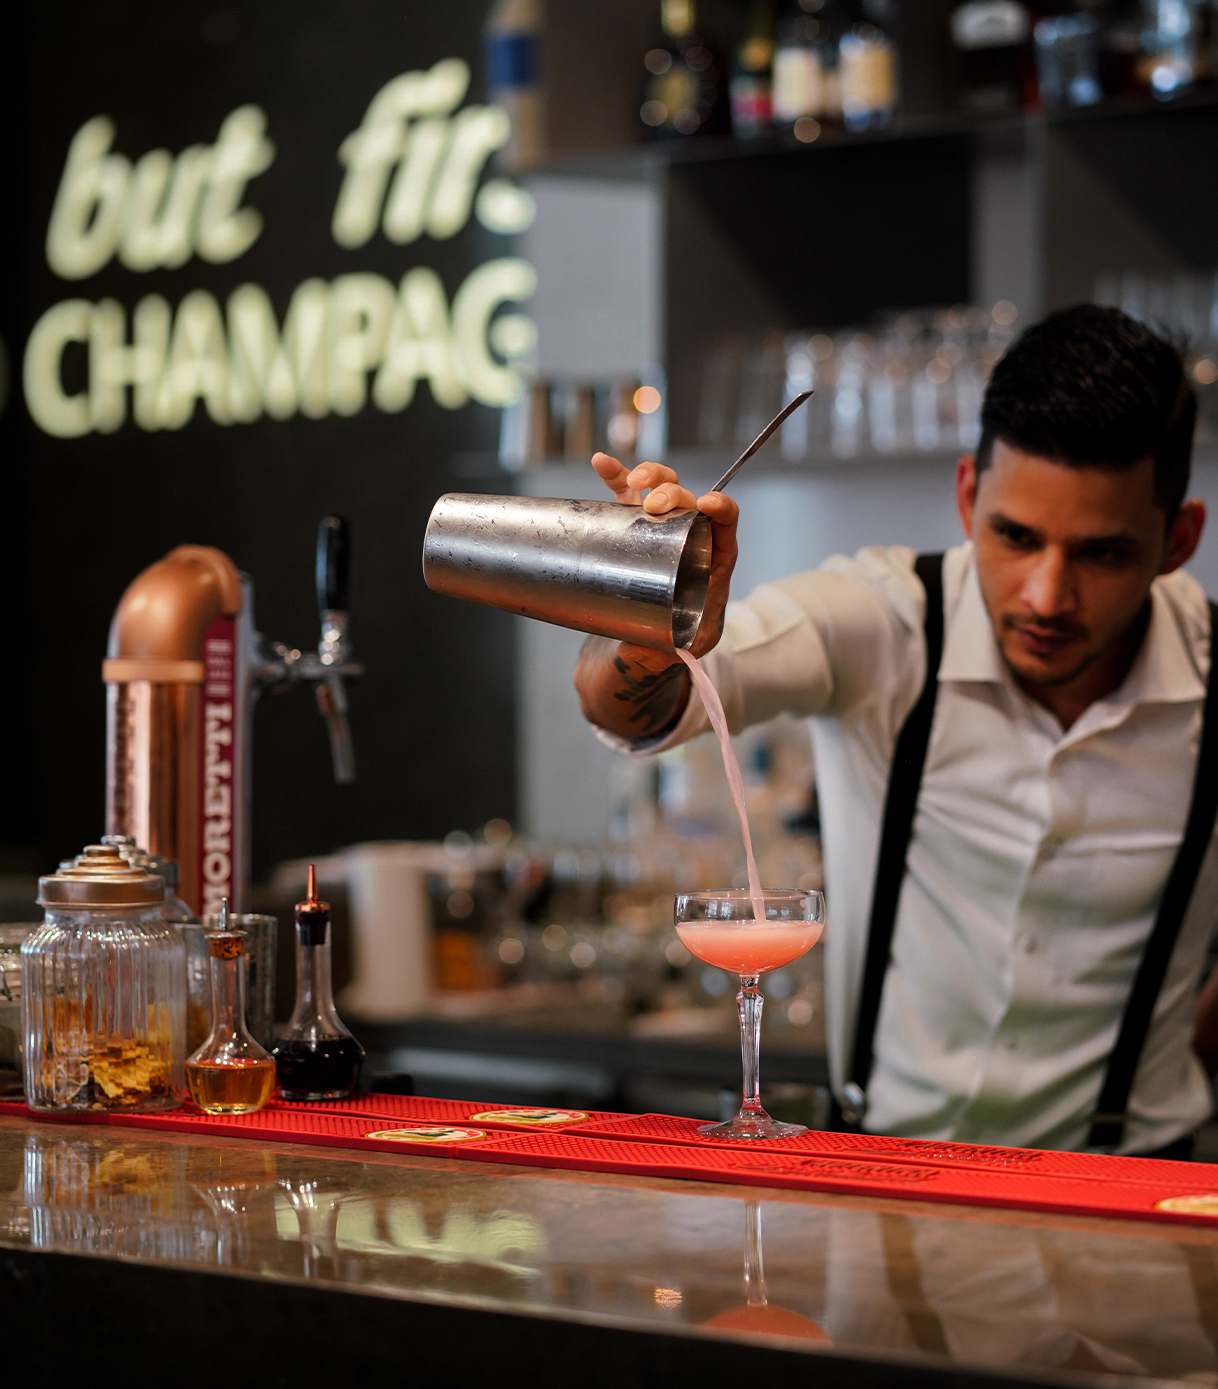 A mixologist preparing a pink cocktail on the bar.